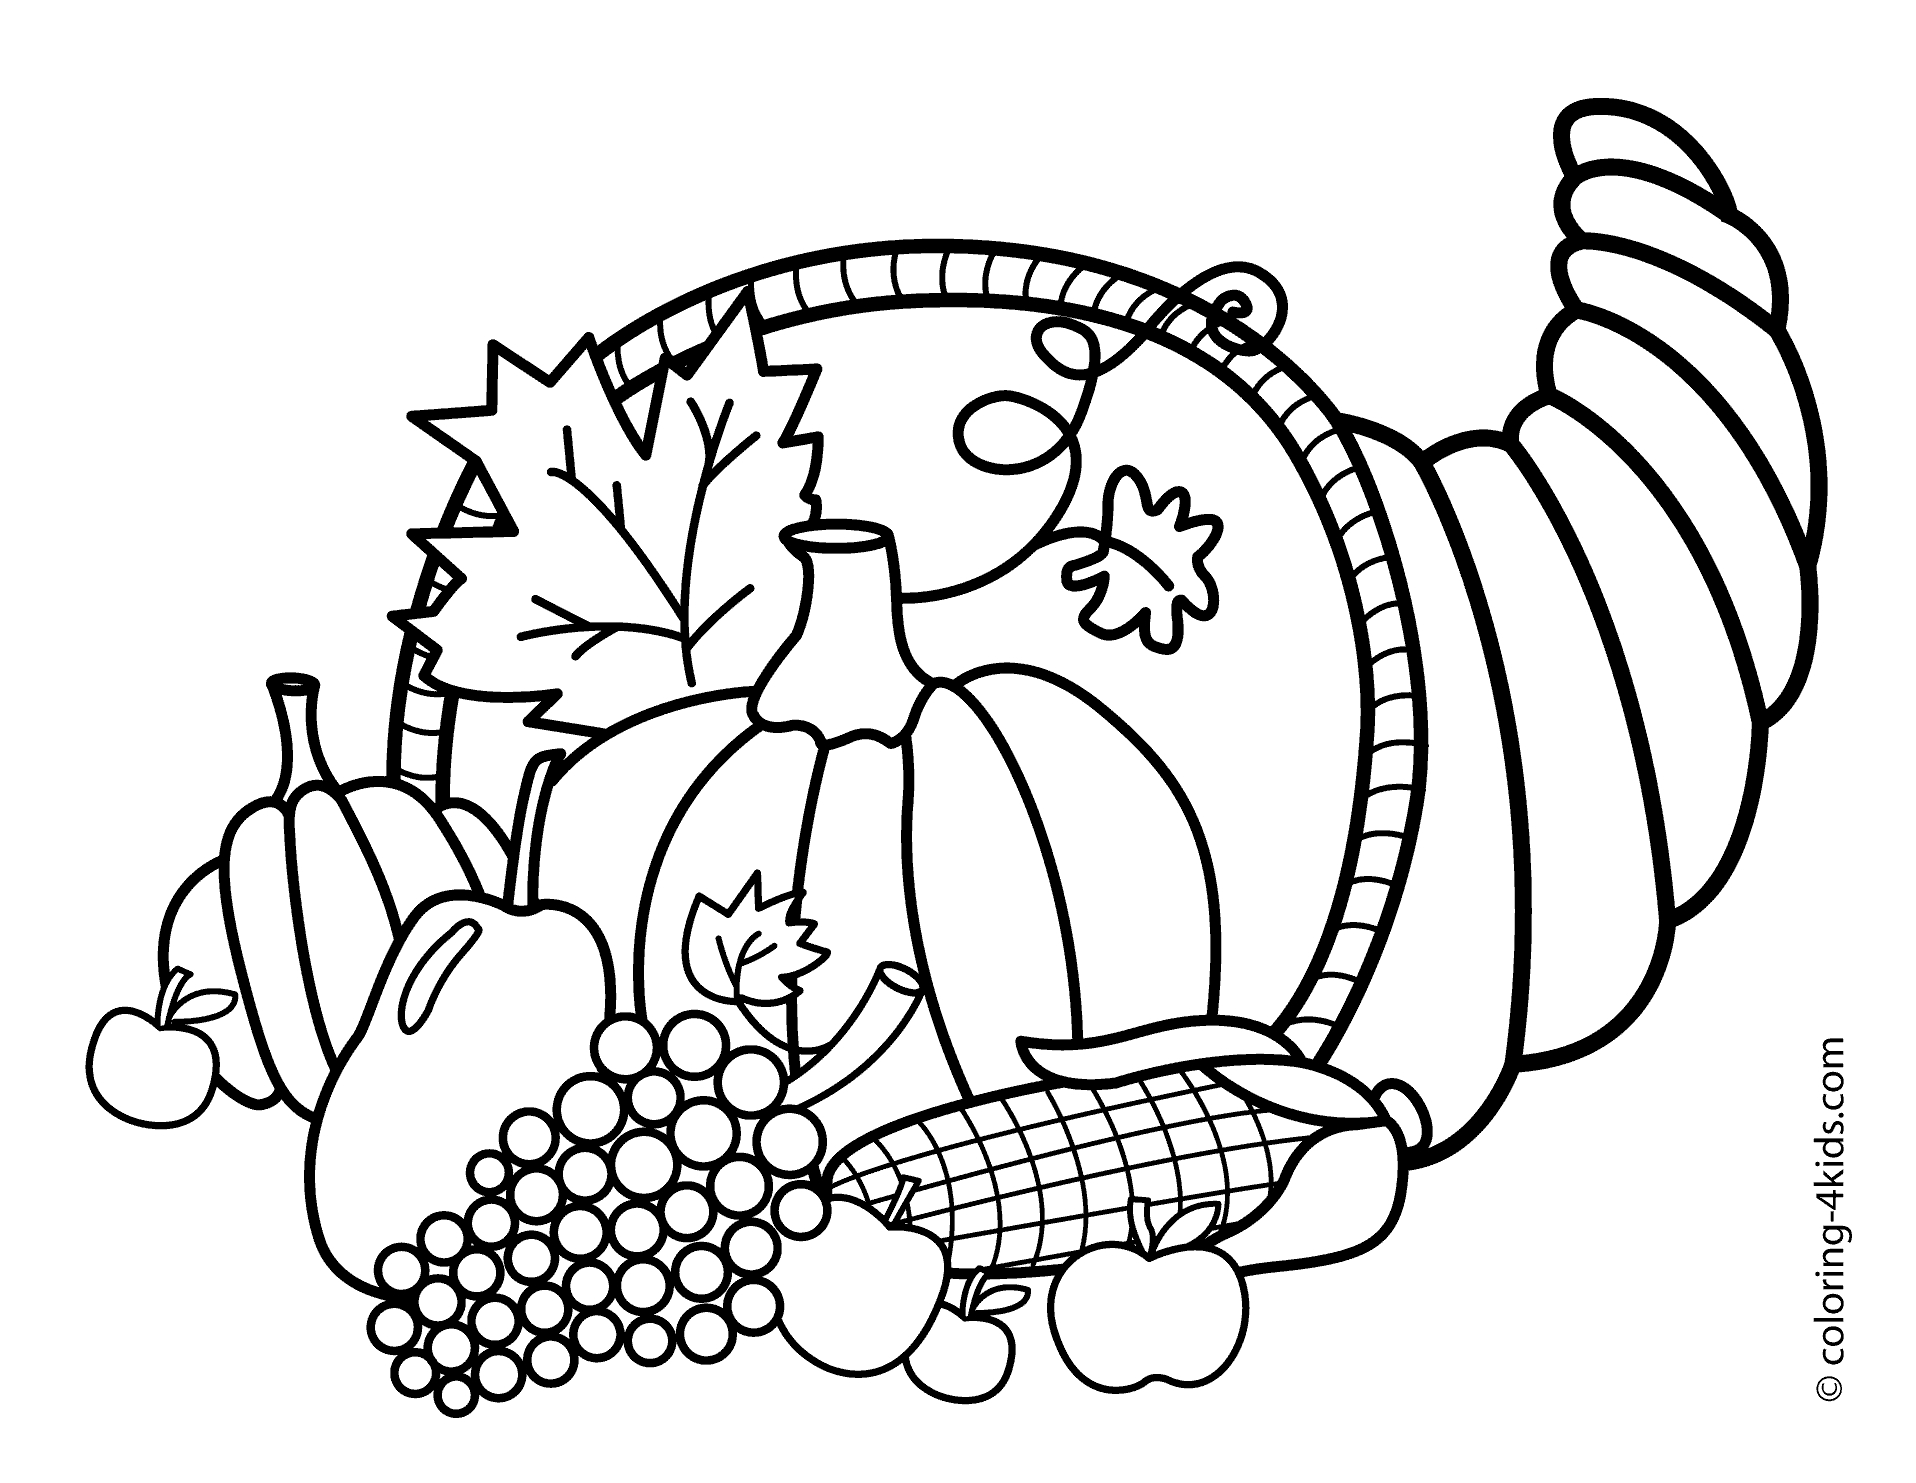 thanksgiving-coloring-pages-pdf-at-getcolorings-free-printable